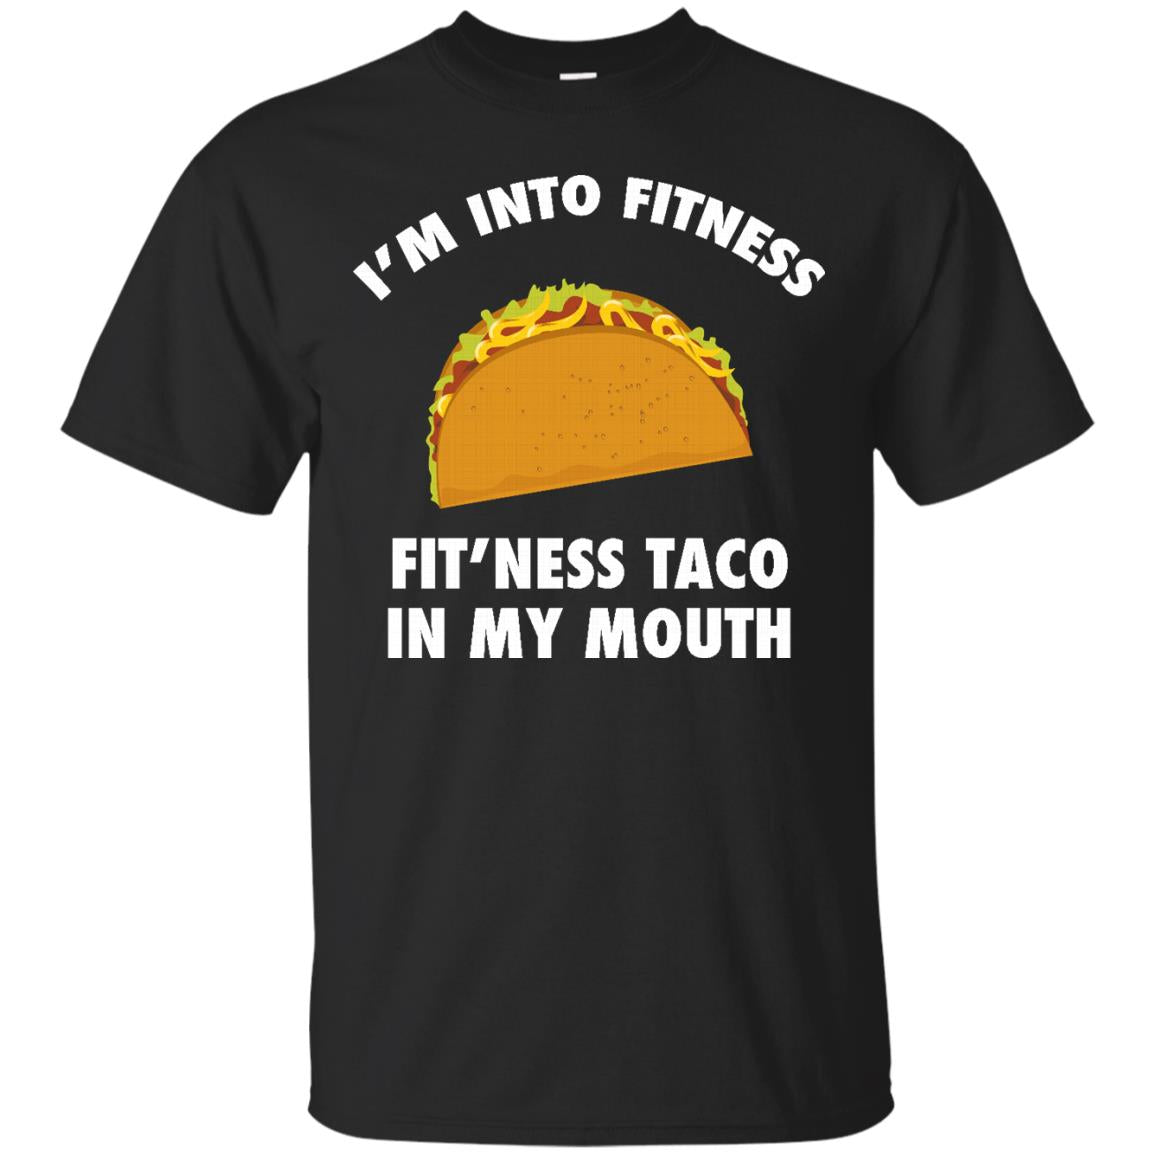 I’m into fitness fit'ness taco in my mouth shirt, tank top, hoodie